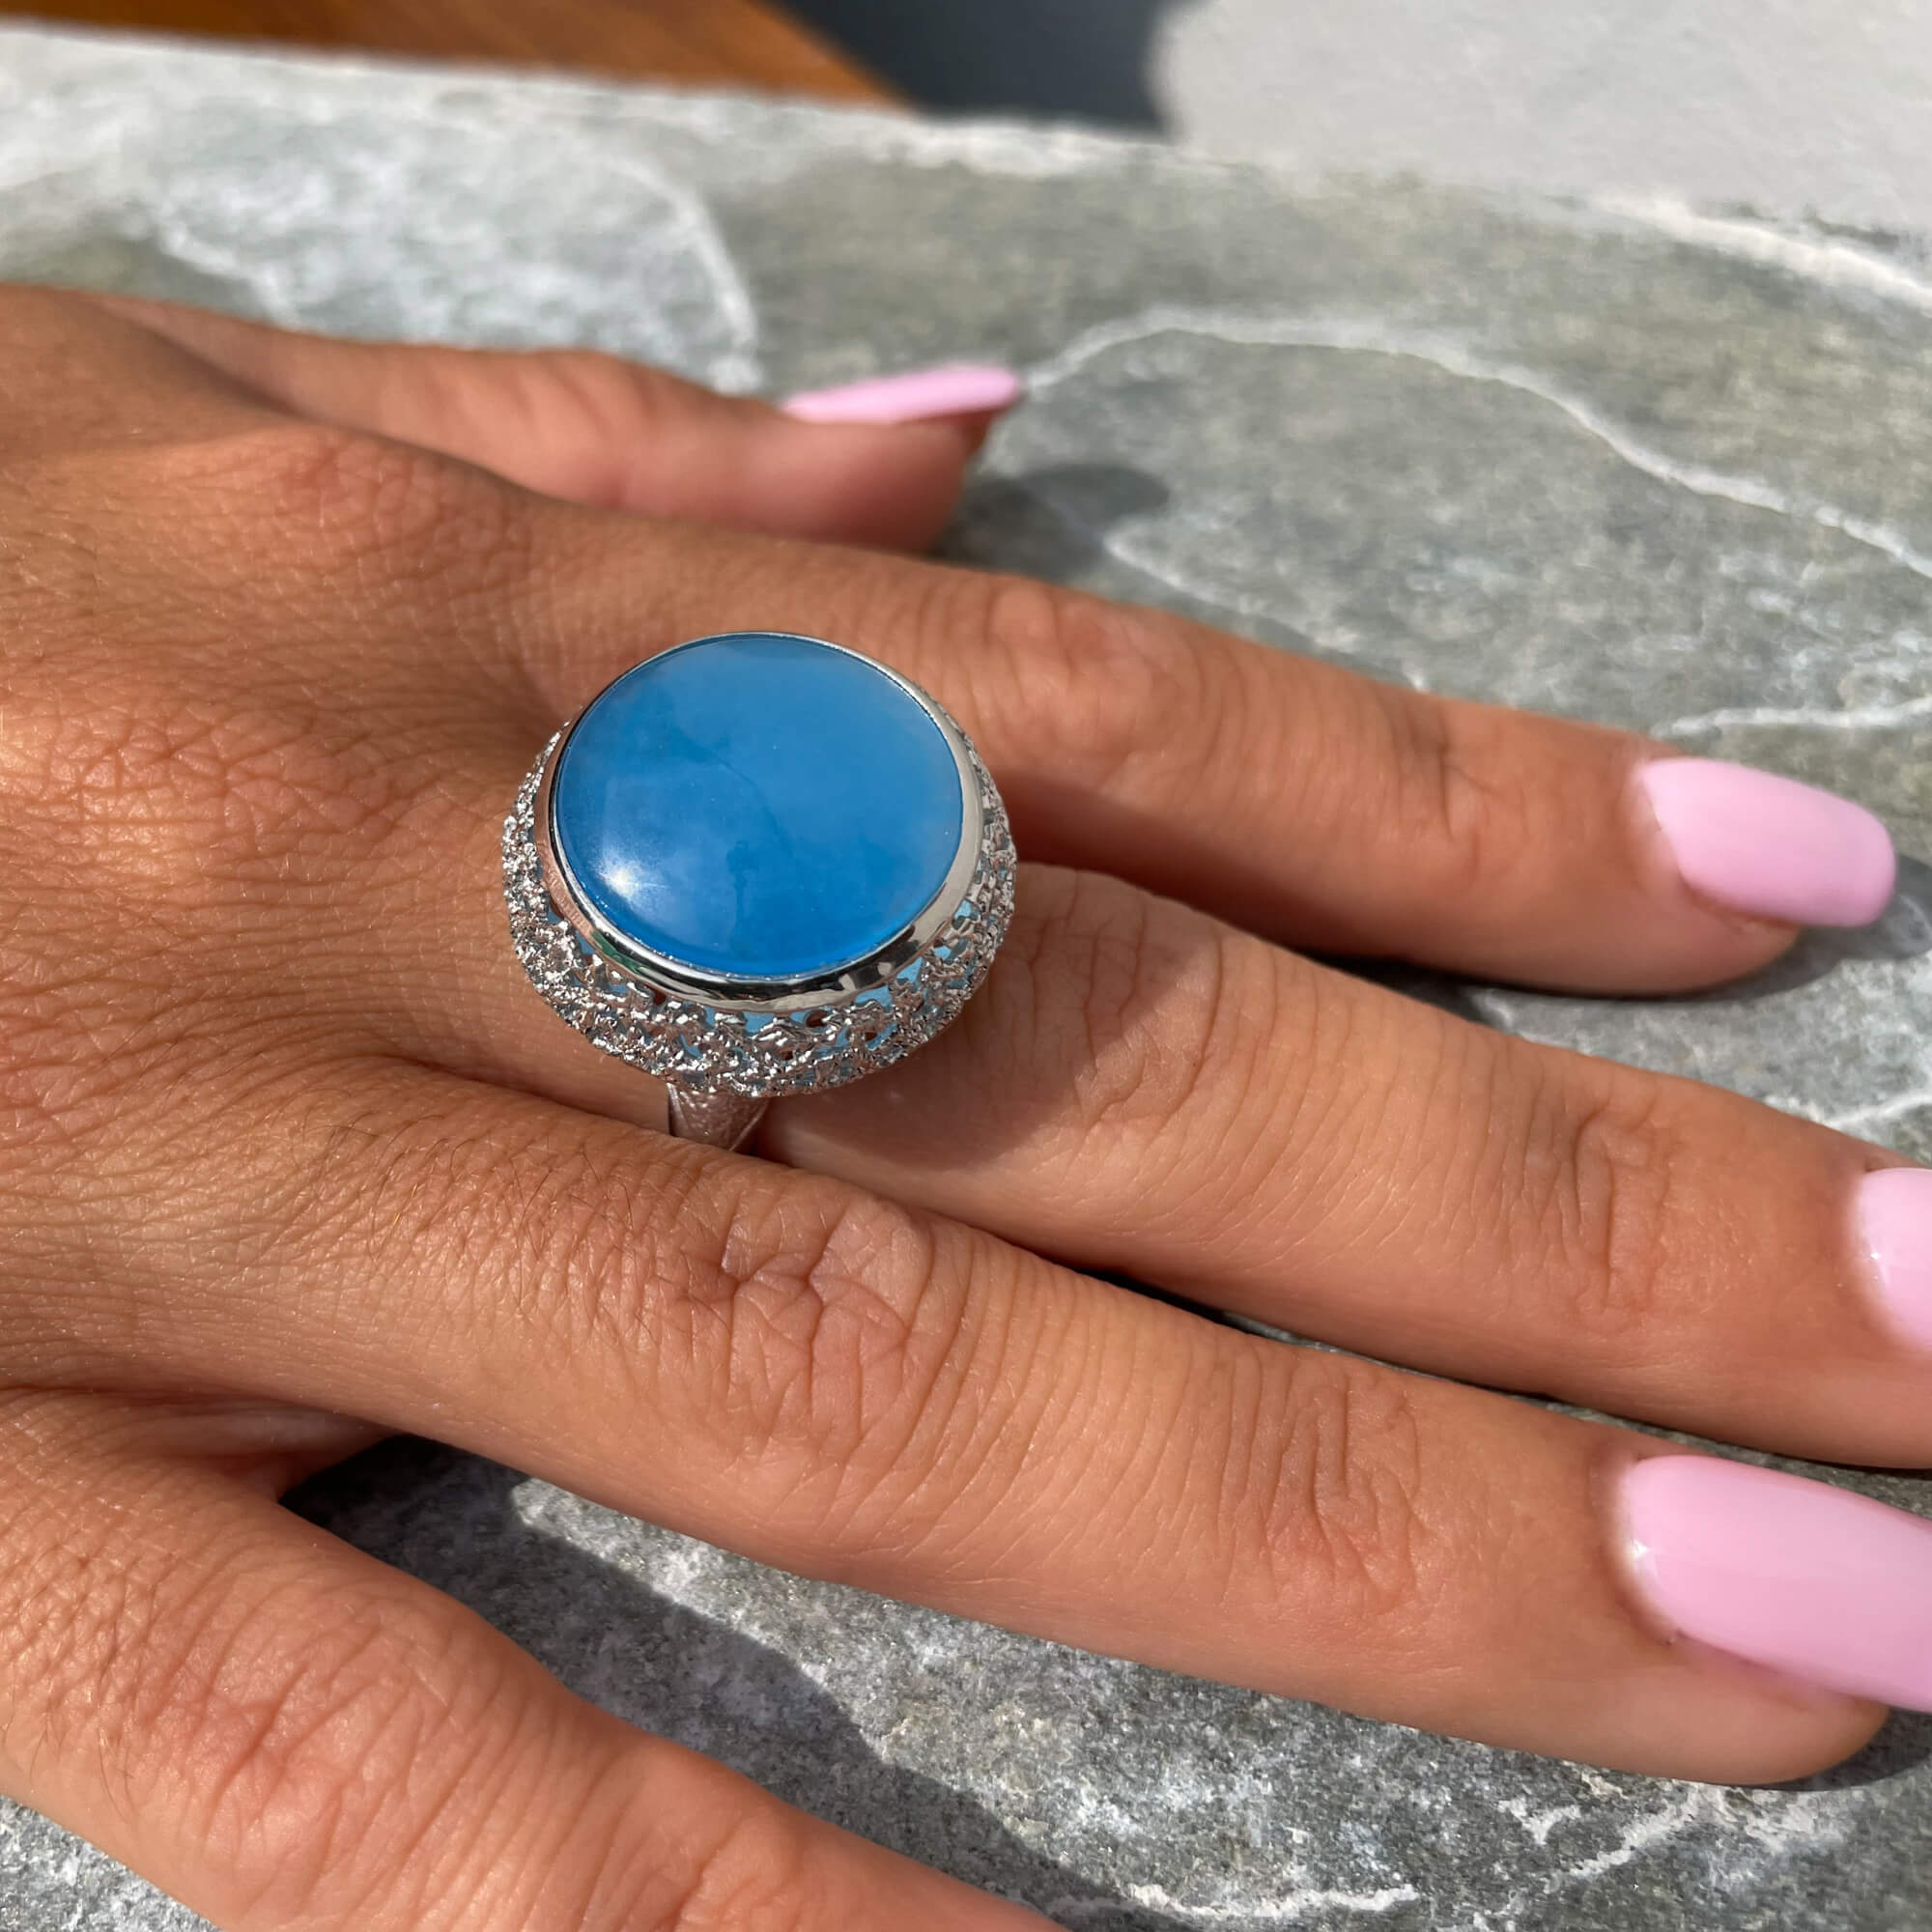 Worked silver ring with a blue quartz stone